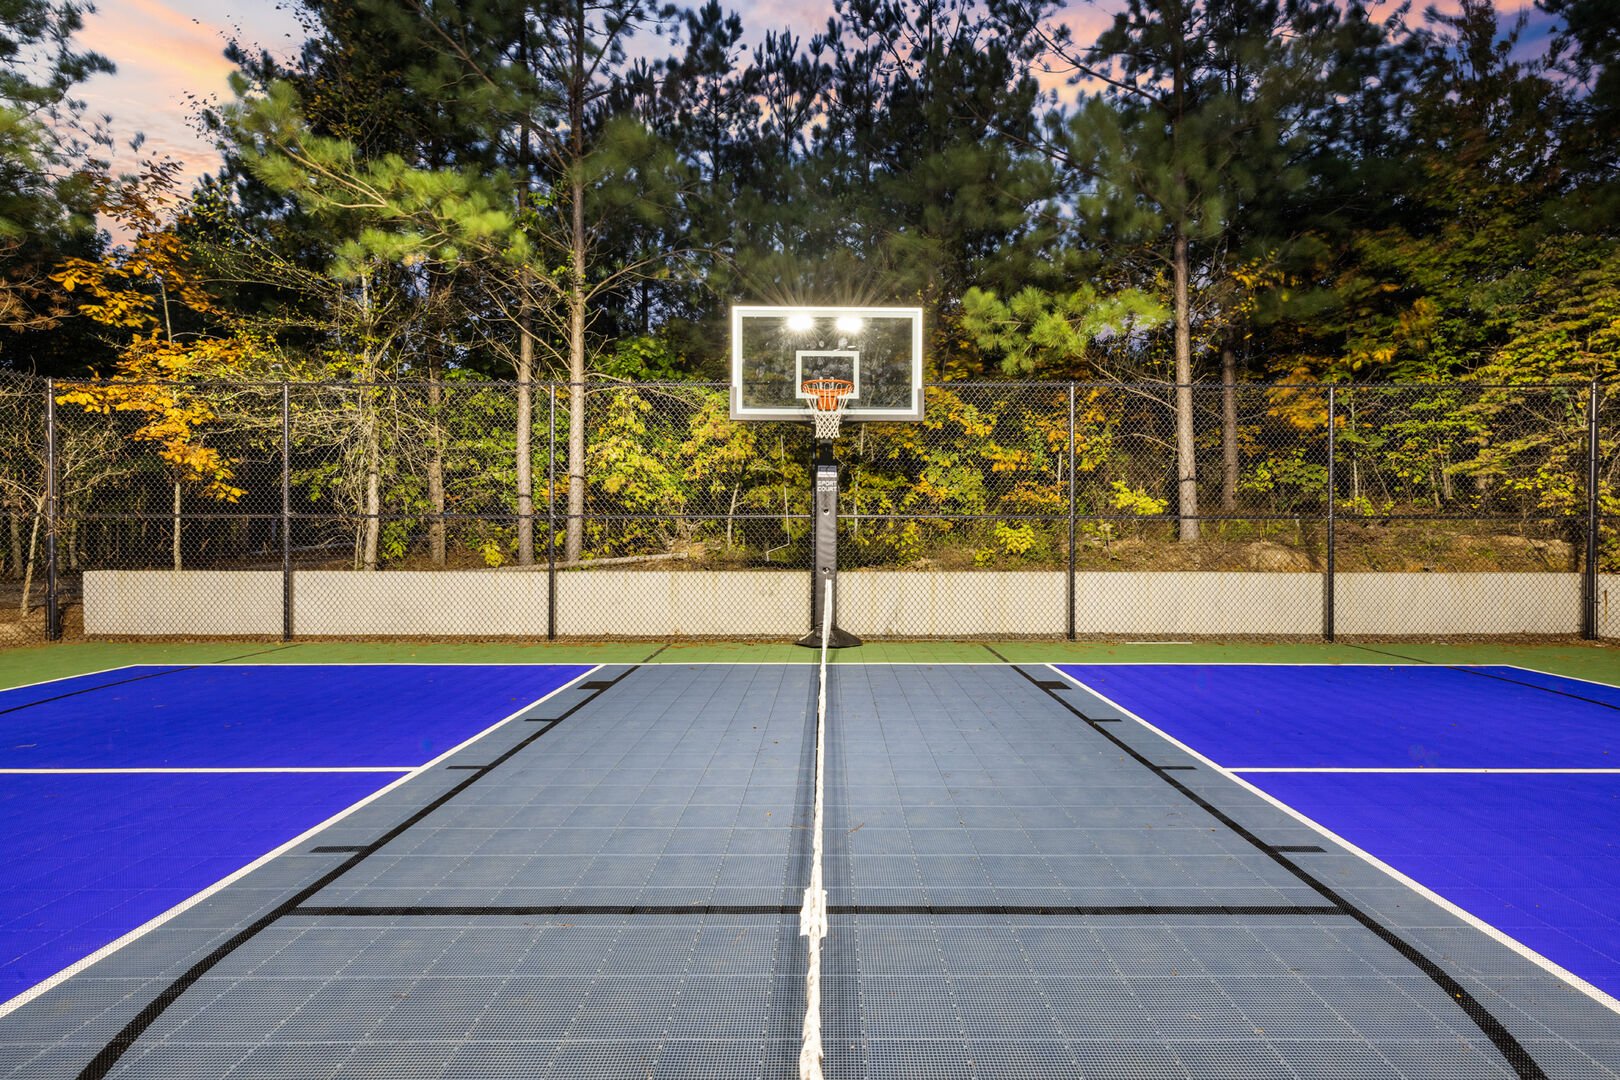 Basketball, pickle ball and tennis court